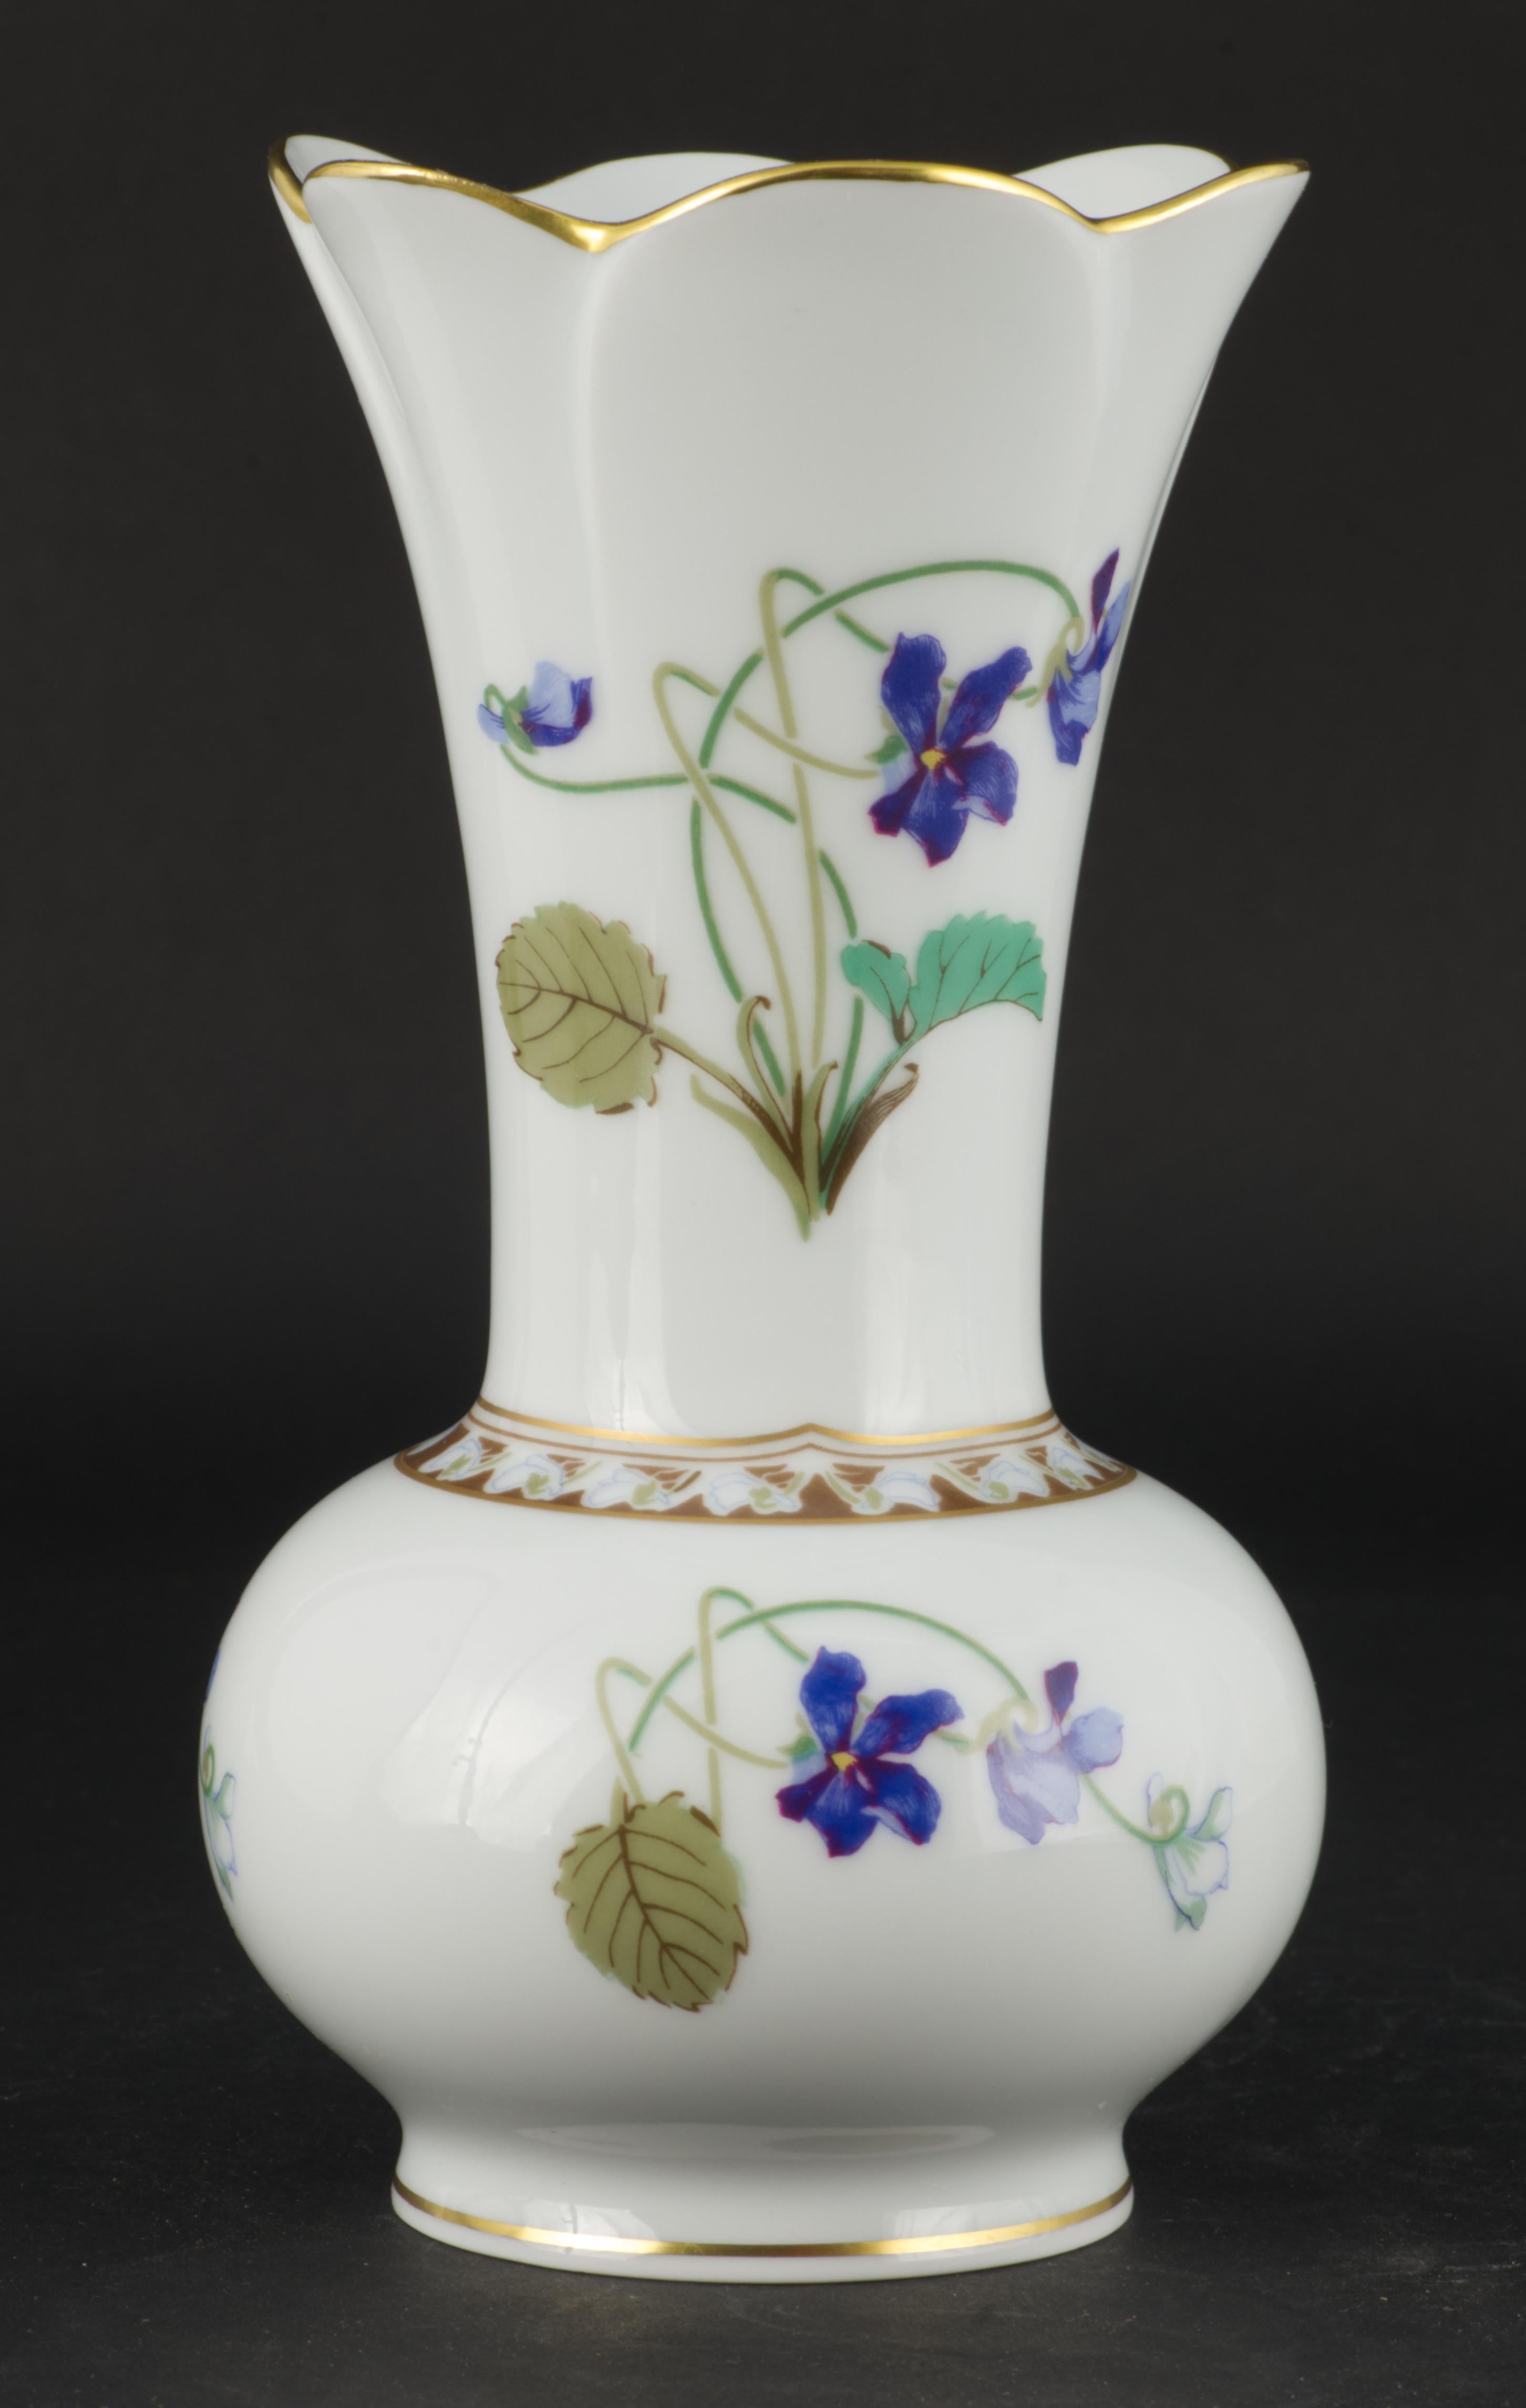 
Haviland Limoges France vase in Imperatrice Eugenie pattern is made on one of the discontinued blanks and is probably one of the first vases decorated in this iconic pattern. 

Originally the pattern was created by Theodore Haviland for the Empress